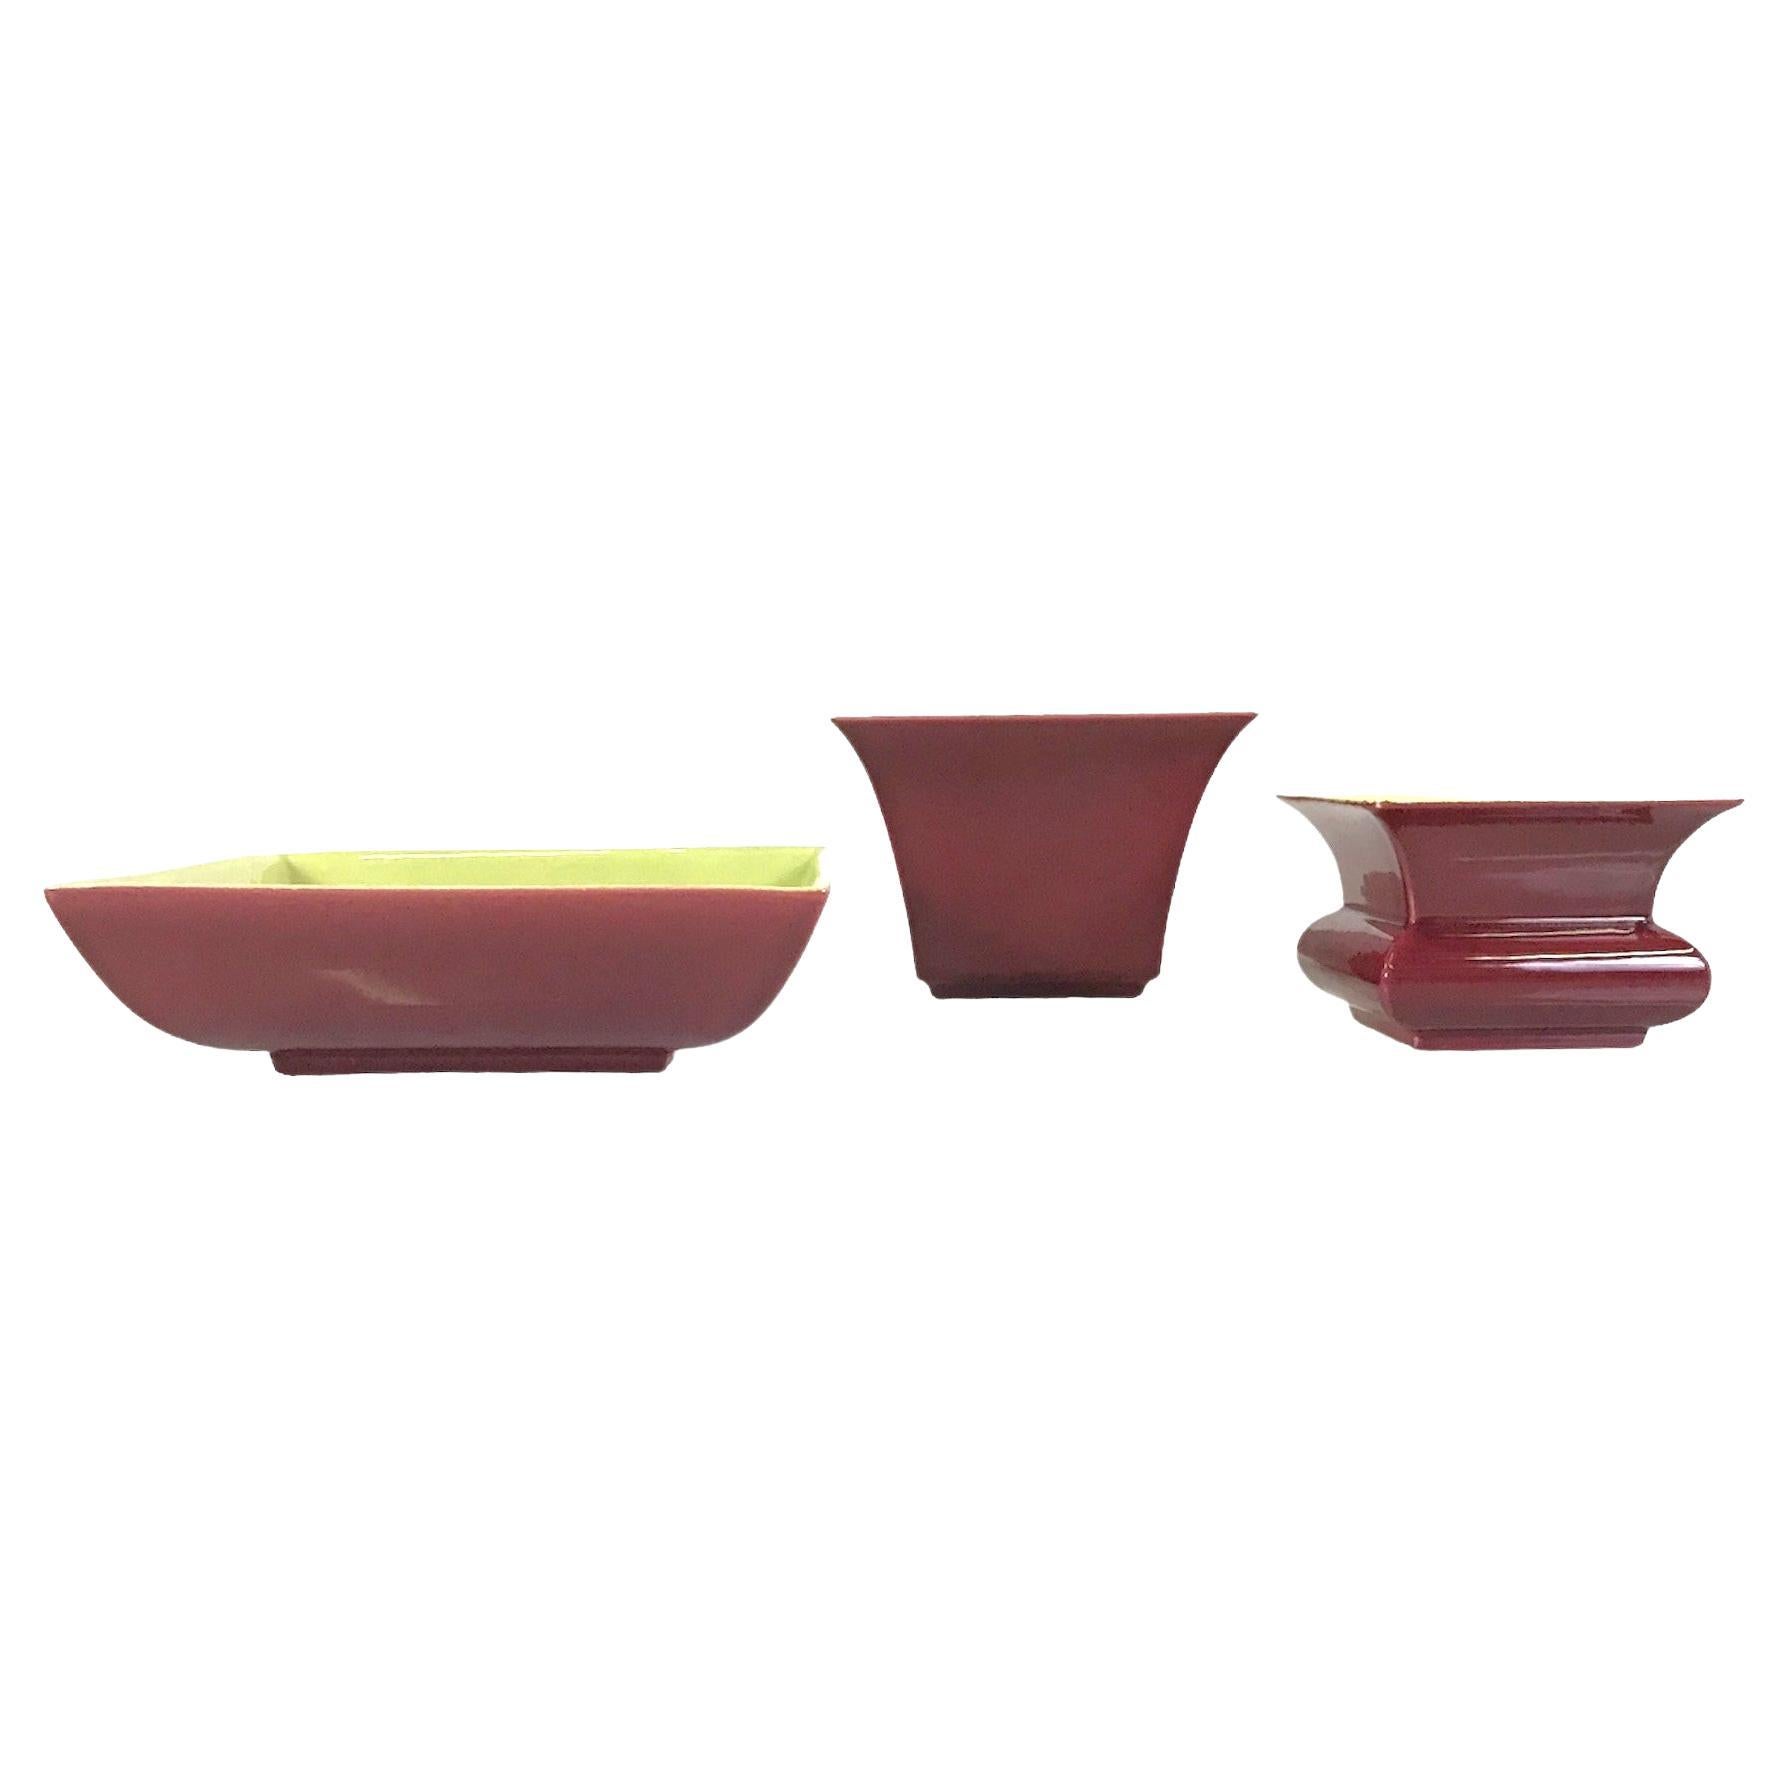 Asian inspired grouping of 3 rare ceramic vessels by Franciscan Ware division of Gladding-McBean Pottery. These 3 Mid-Century Modern pieces have a maroon glaze on the outside and either Mandarin Yellow, the two vases, or Lime Green glaze, bowl, on